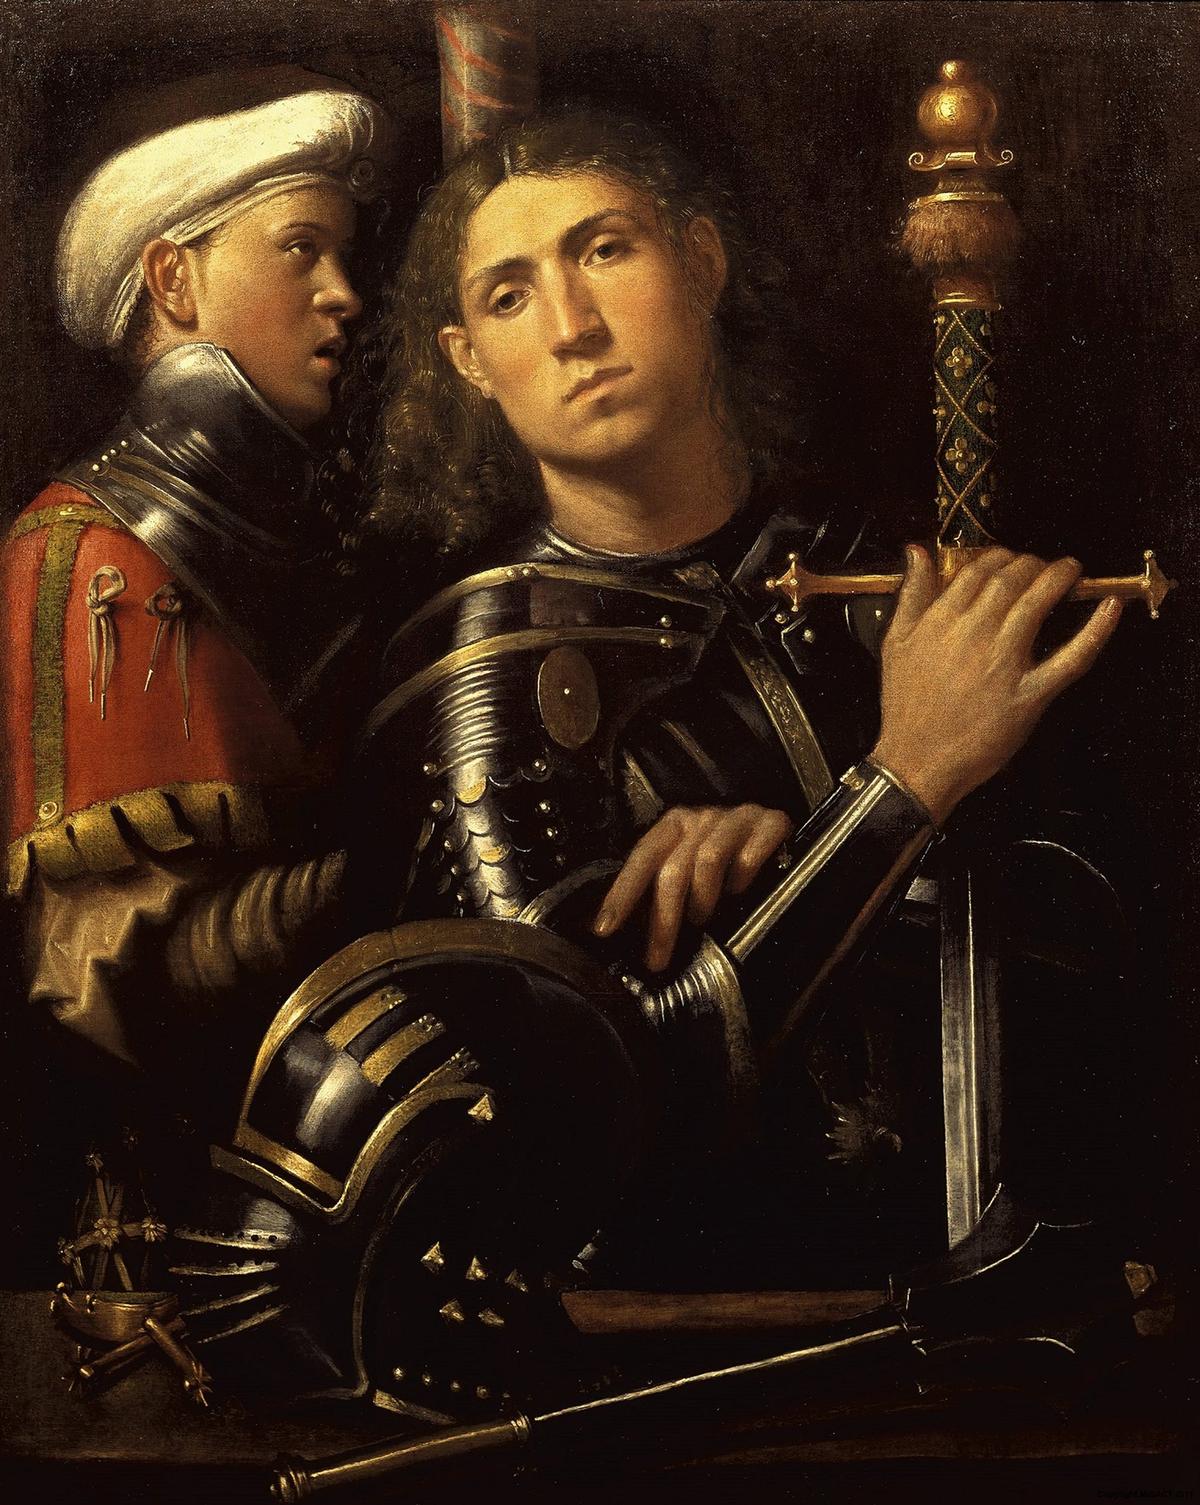 Portrait of a warrior with his squire, who is his son, circa 1501–1502, by Giorgione. Oil on canvas. Uffizi Gallery, Florence, Italy. (Public Domain)